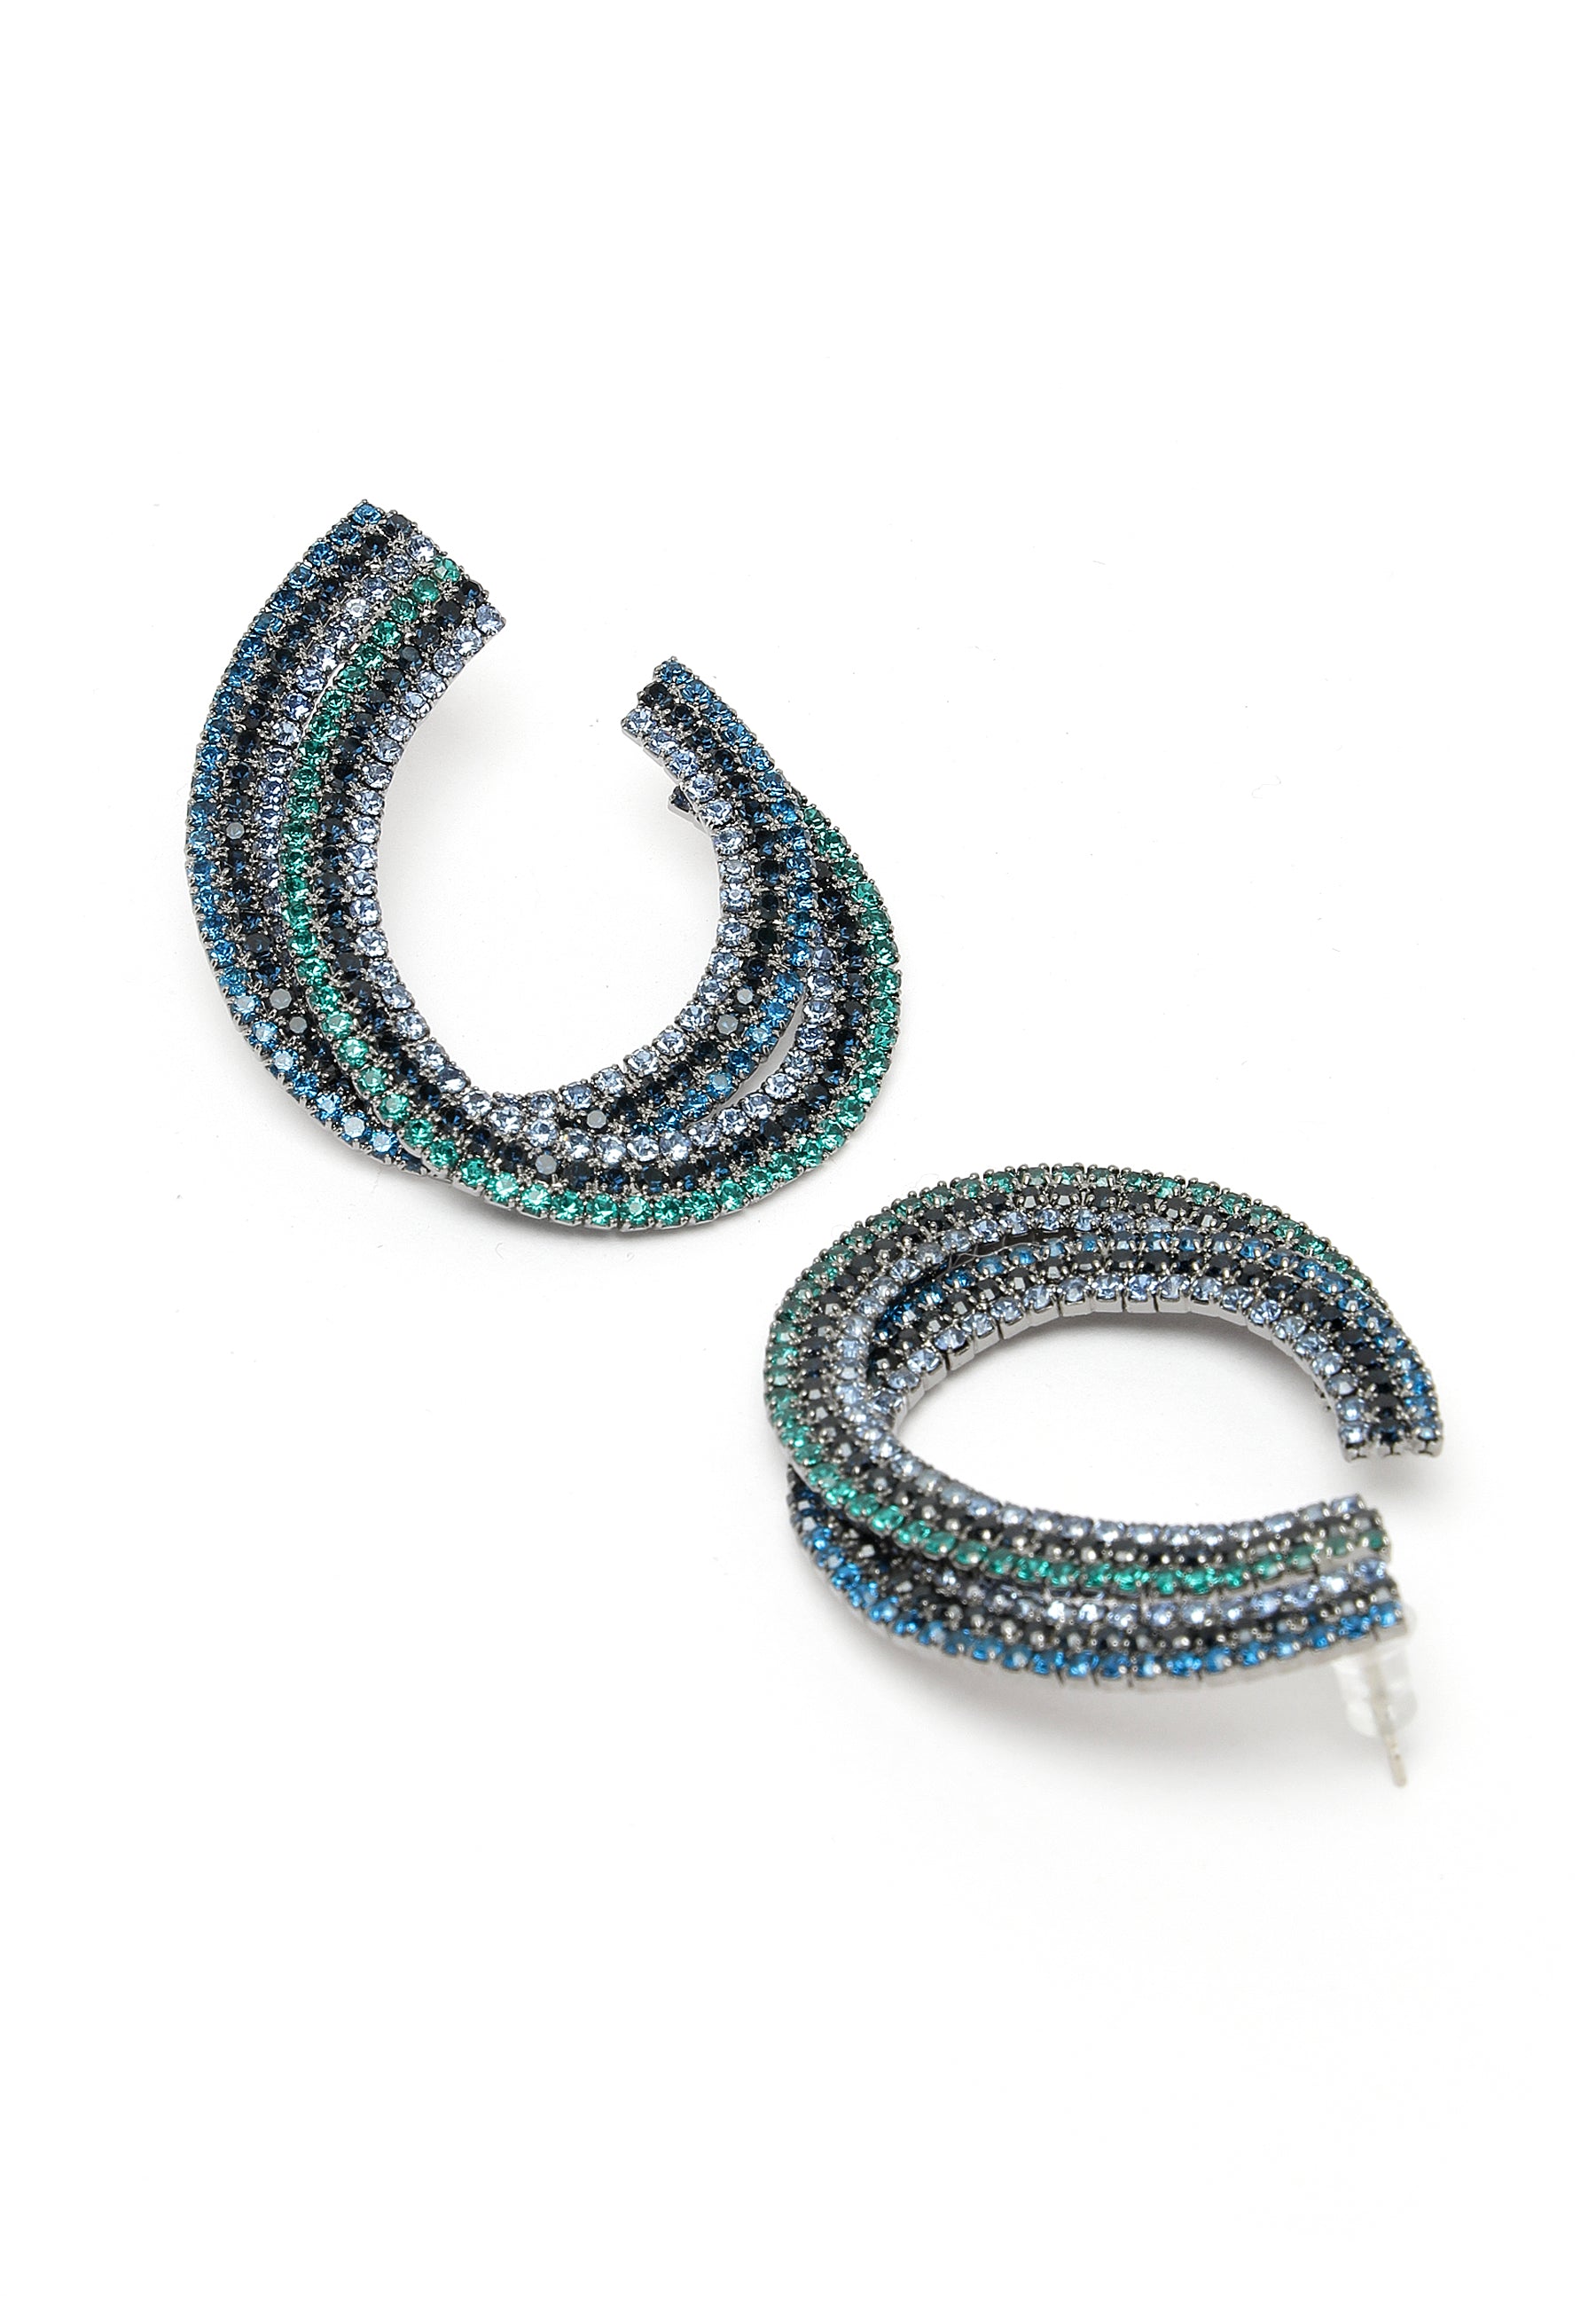 Blue Eclipse-Shaped Crystal Studded Earrings